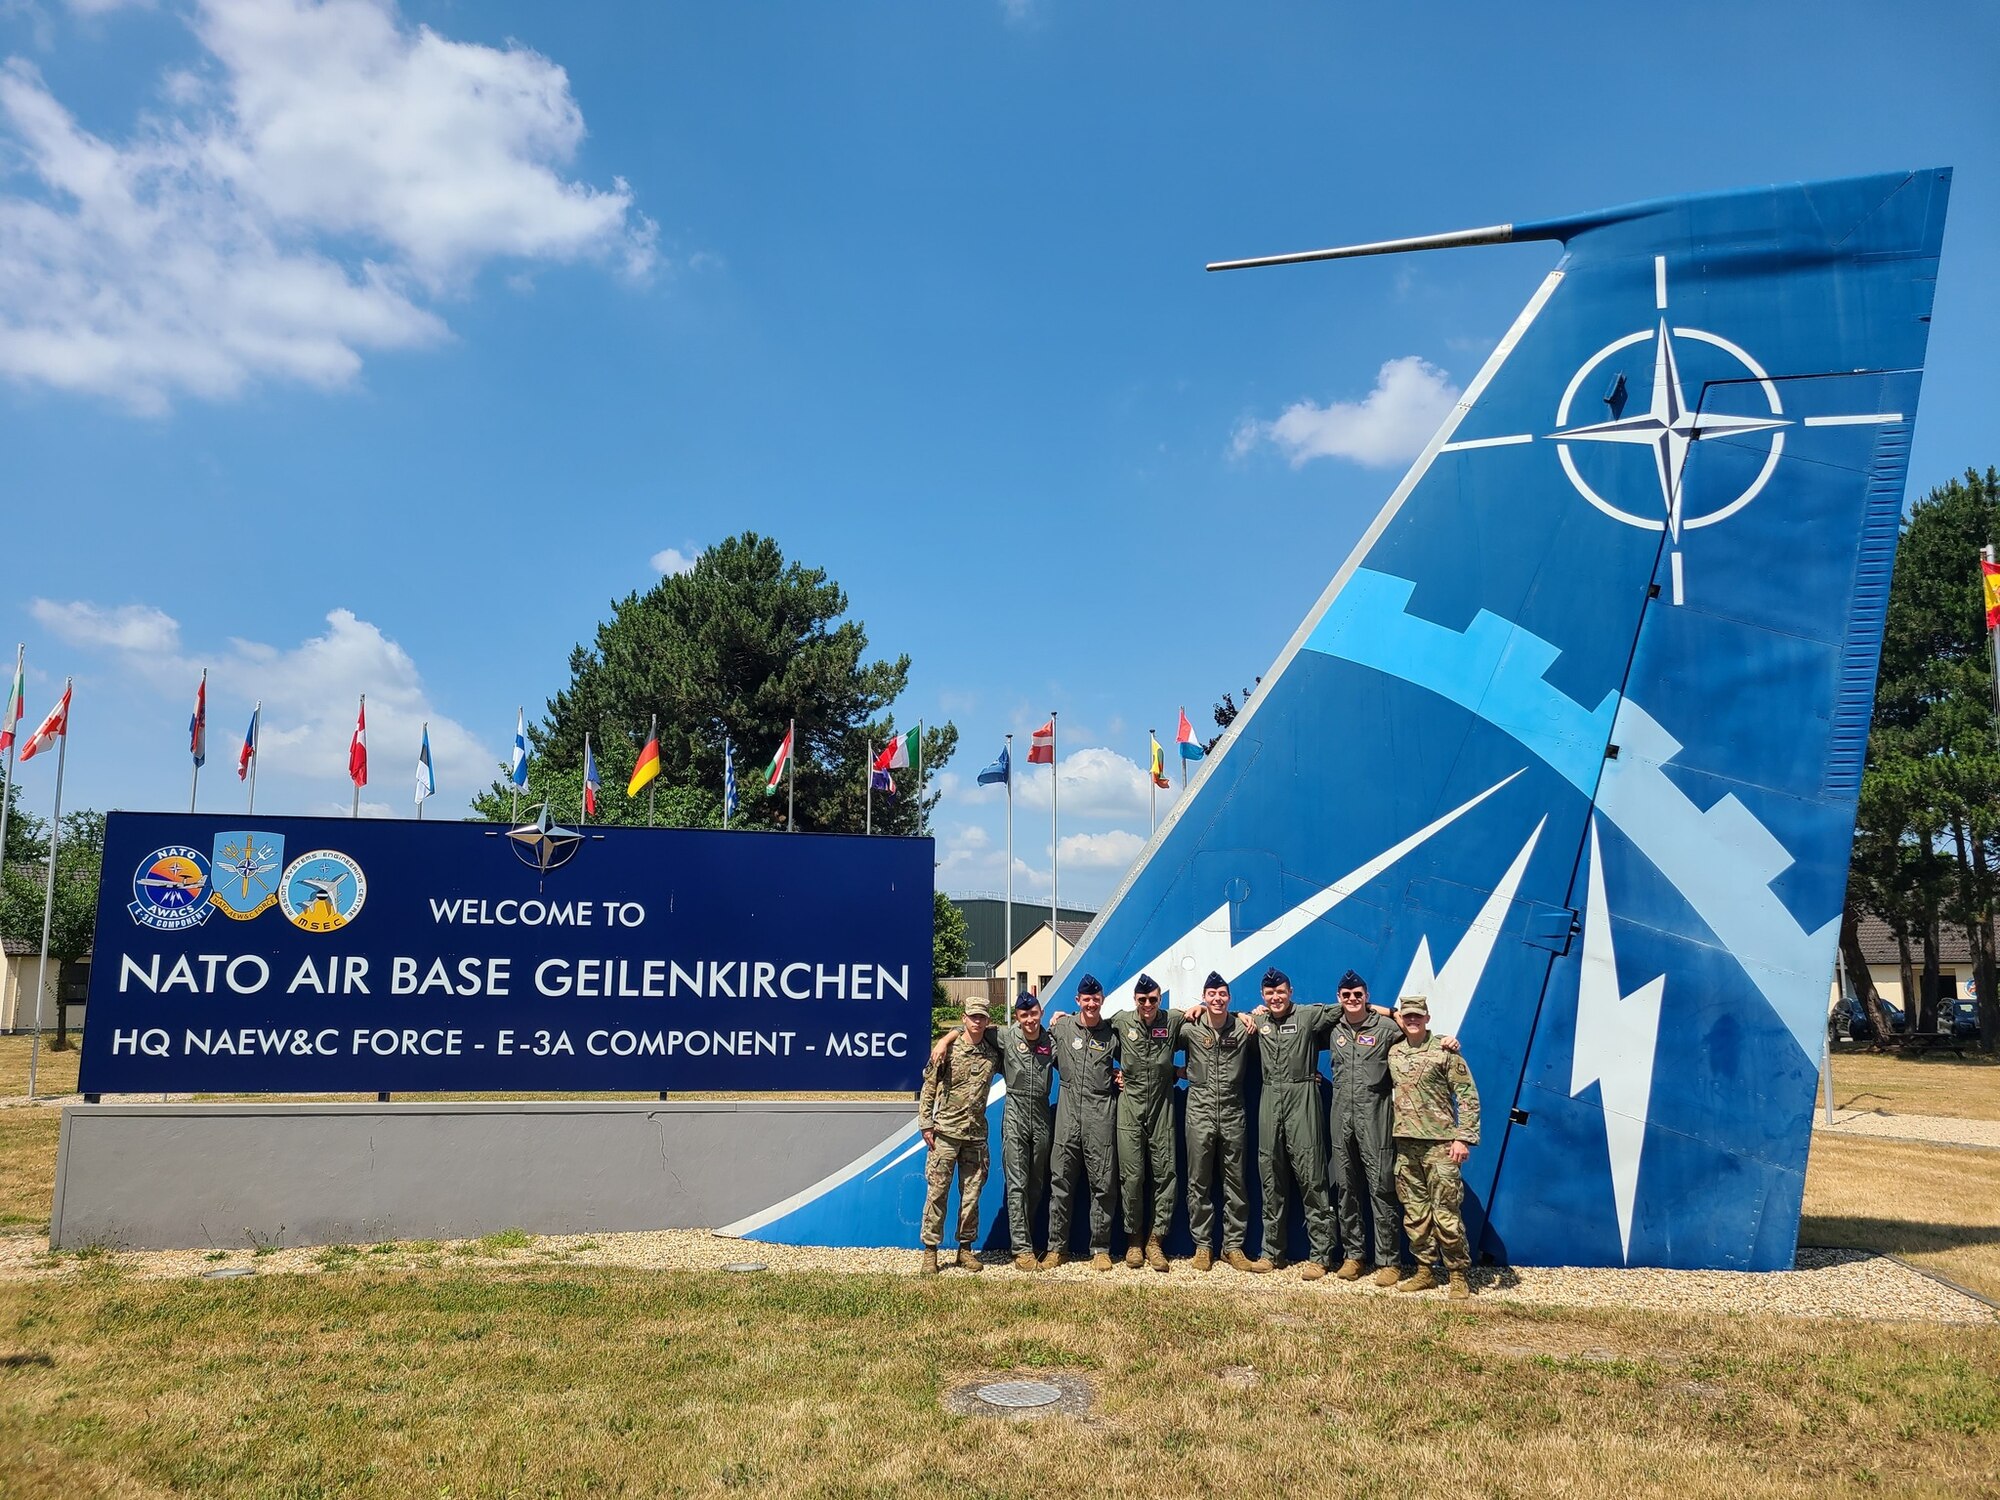 Several Air Force ROTC cadets and cadre participated in the program’s inaugural “Fly NATO” professional development training this summer. The cadets and cadre experienced NATO pilot training at Sheppard Air Force Base, Texas, followed by visiting various NATO locations in Belgium, The Netherlands and Germany.